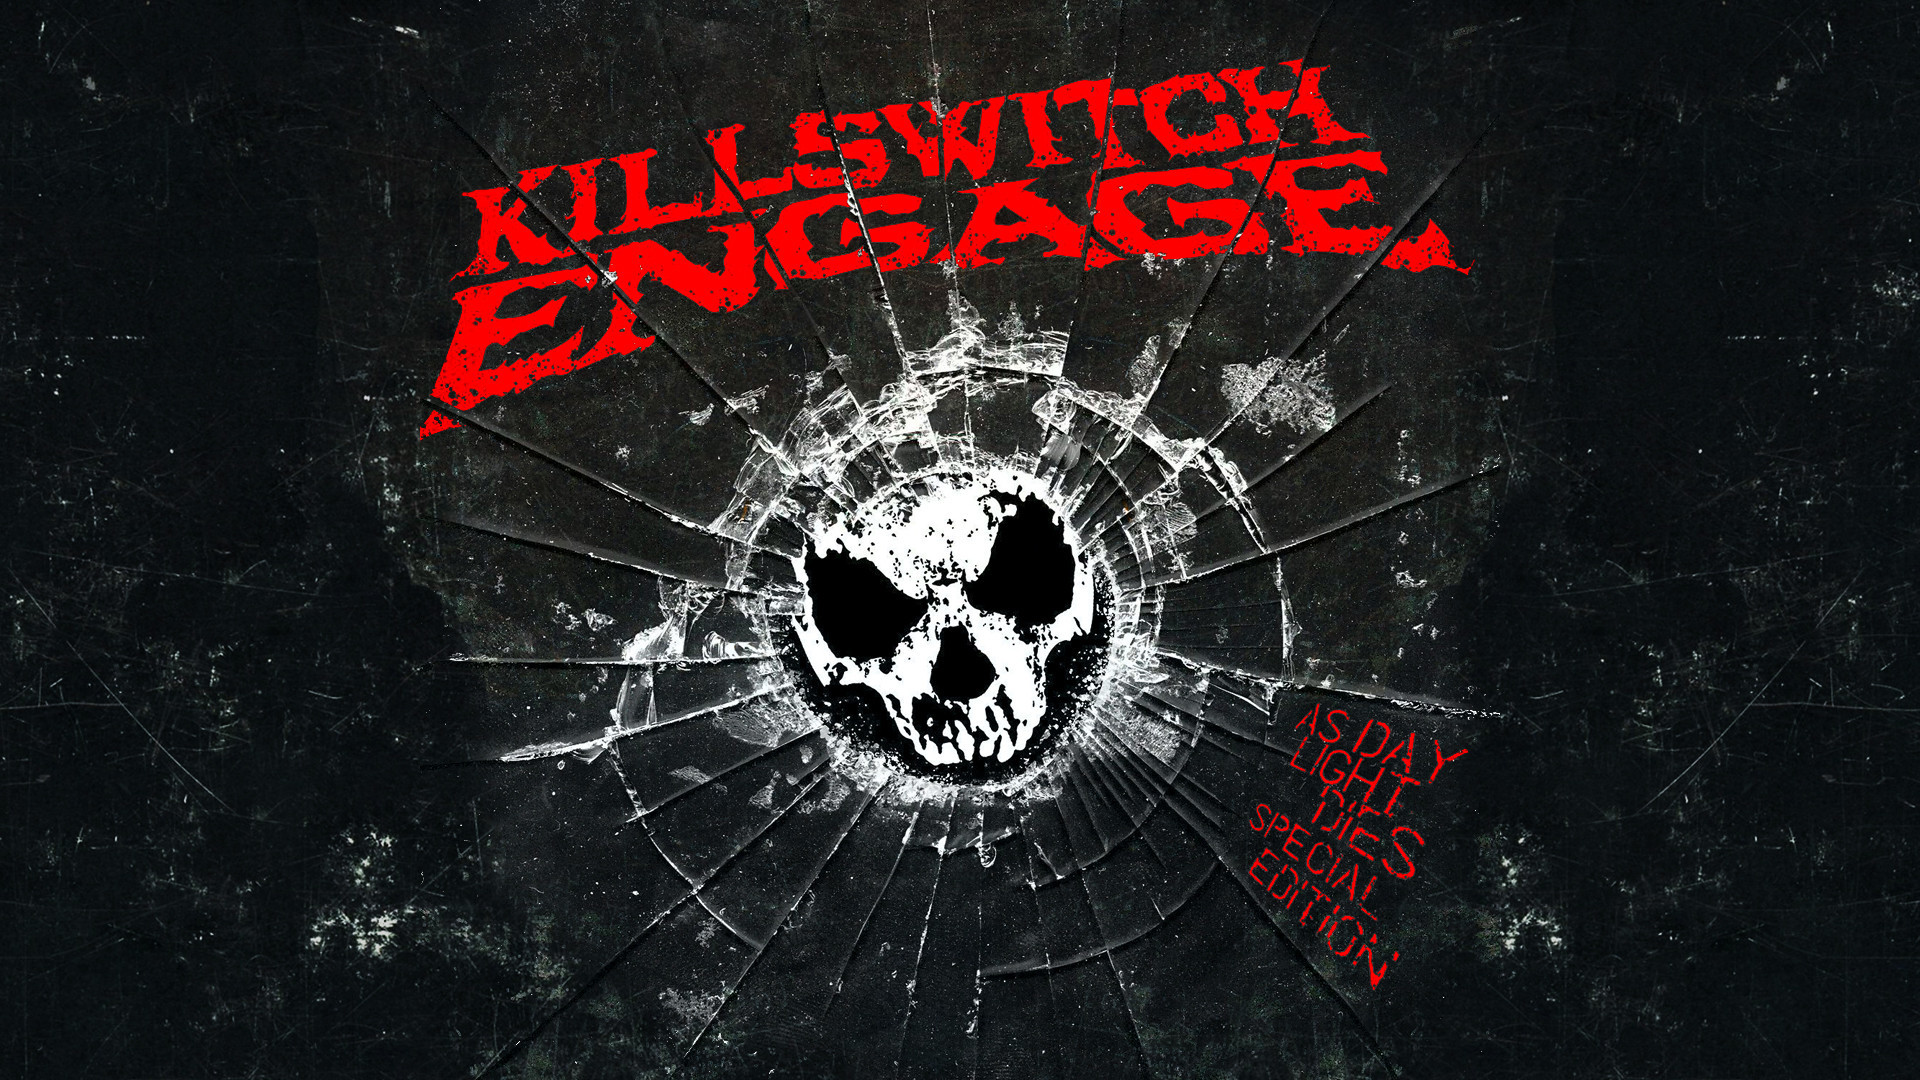 14 Killswitch Engage HD Wallpapers  Backgrounds  Wallpaper Abyss   Killswitch engage Music wallpaper Wallpaper